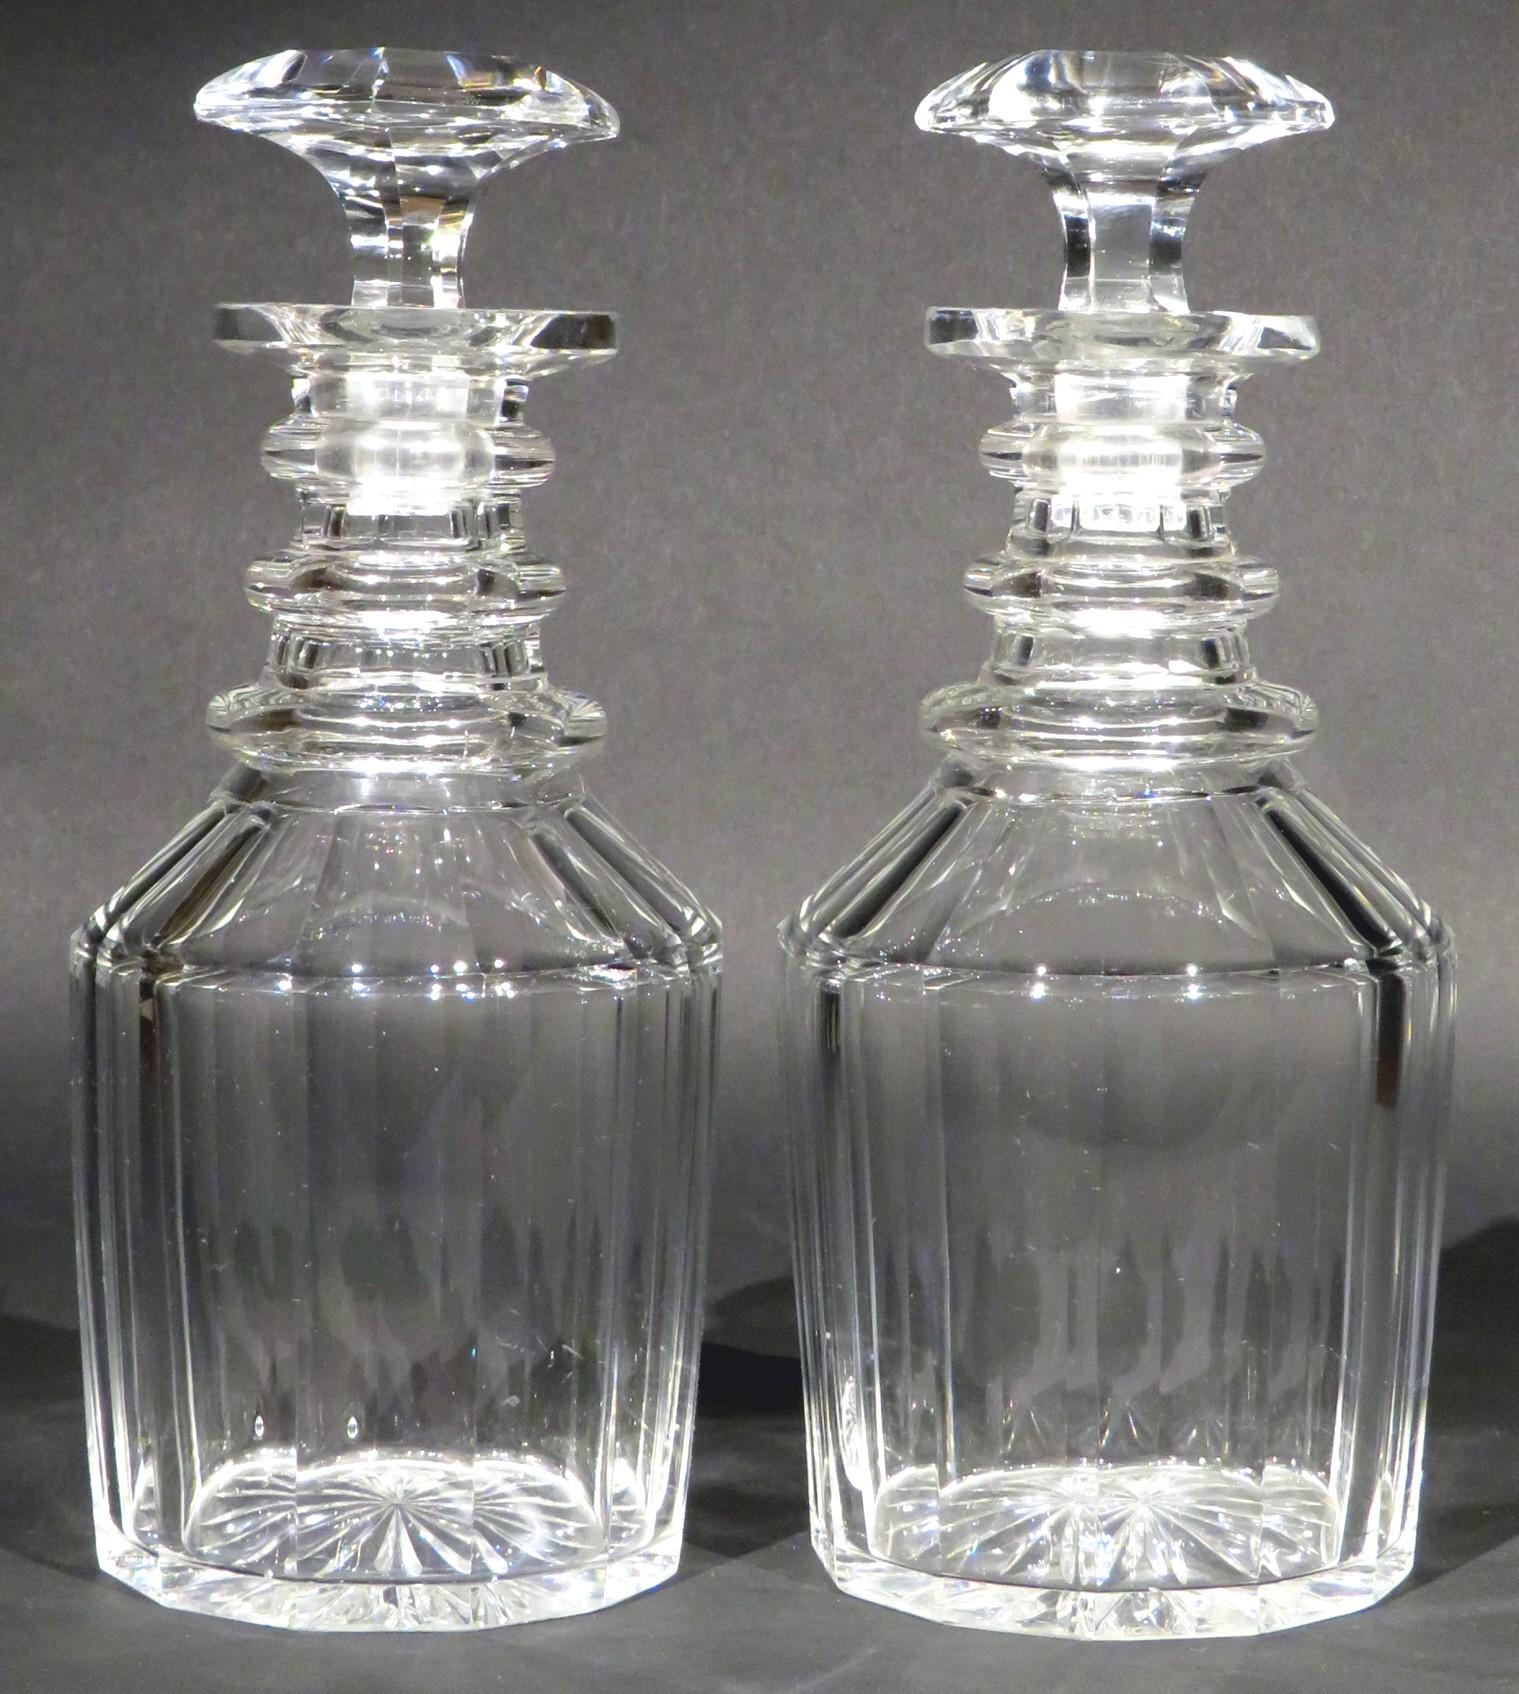 Both decanters of mallet form with panel-faceted shoulders and bodies, rising to triple-ringed necks fitted with their original dedicated and hexagonal shaped stoppers, the undersides of each base engraved with radiating star-cut motifs. Both in